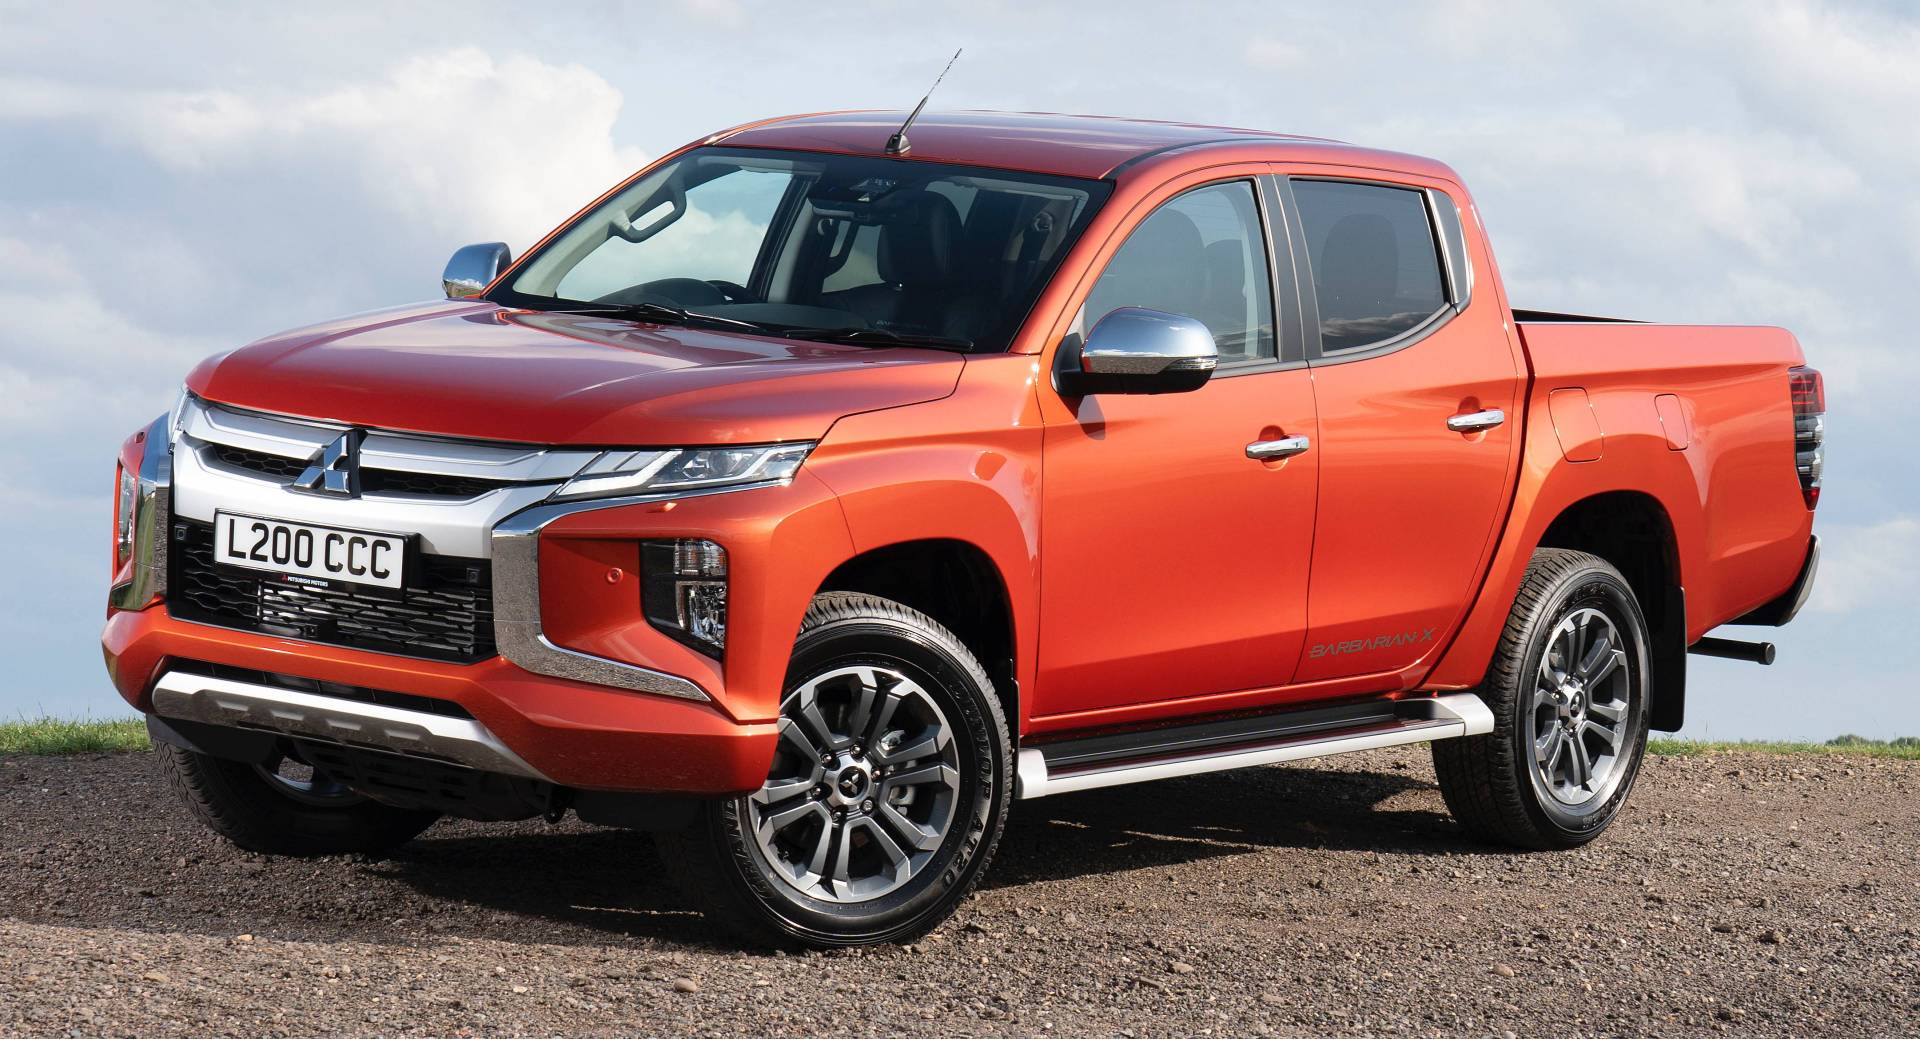 2020 Mitsubishi L200 Arrives In The UK With £21,515 Base ...